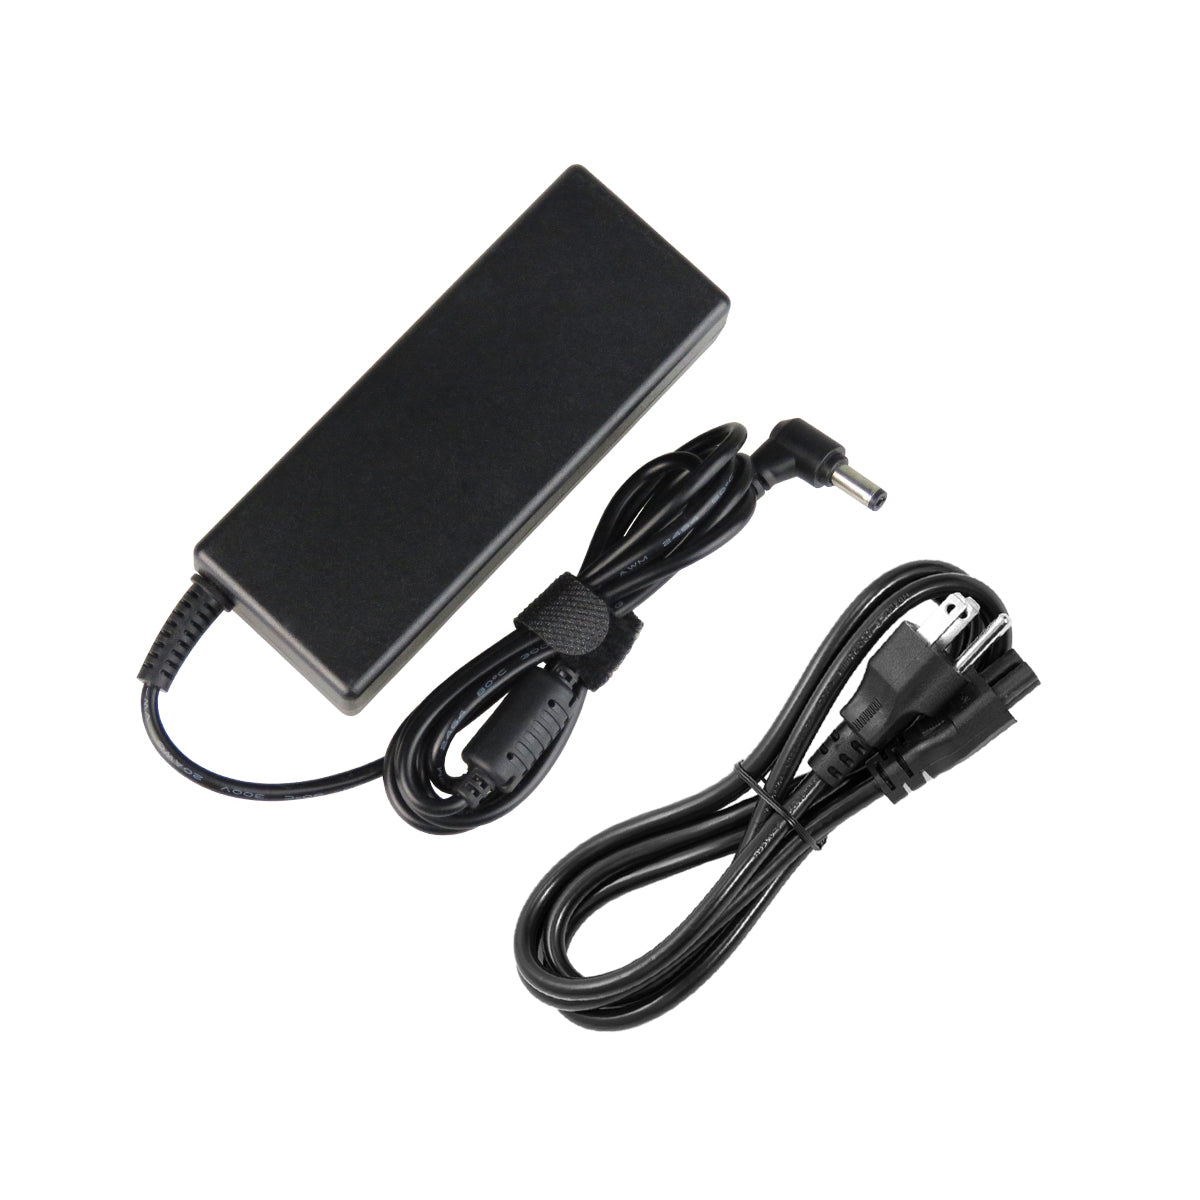 AC Adapter Charger for Toshiba Satellite l655d Notebook.